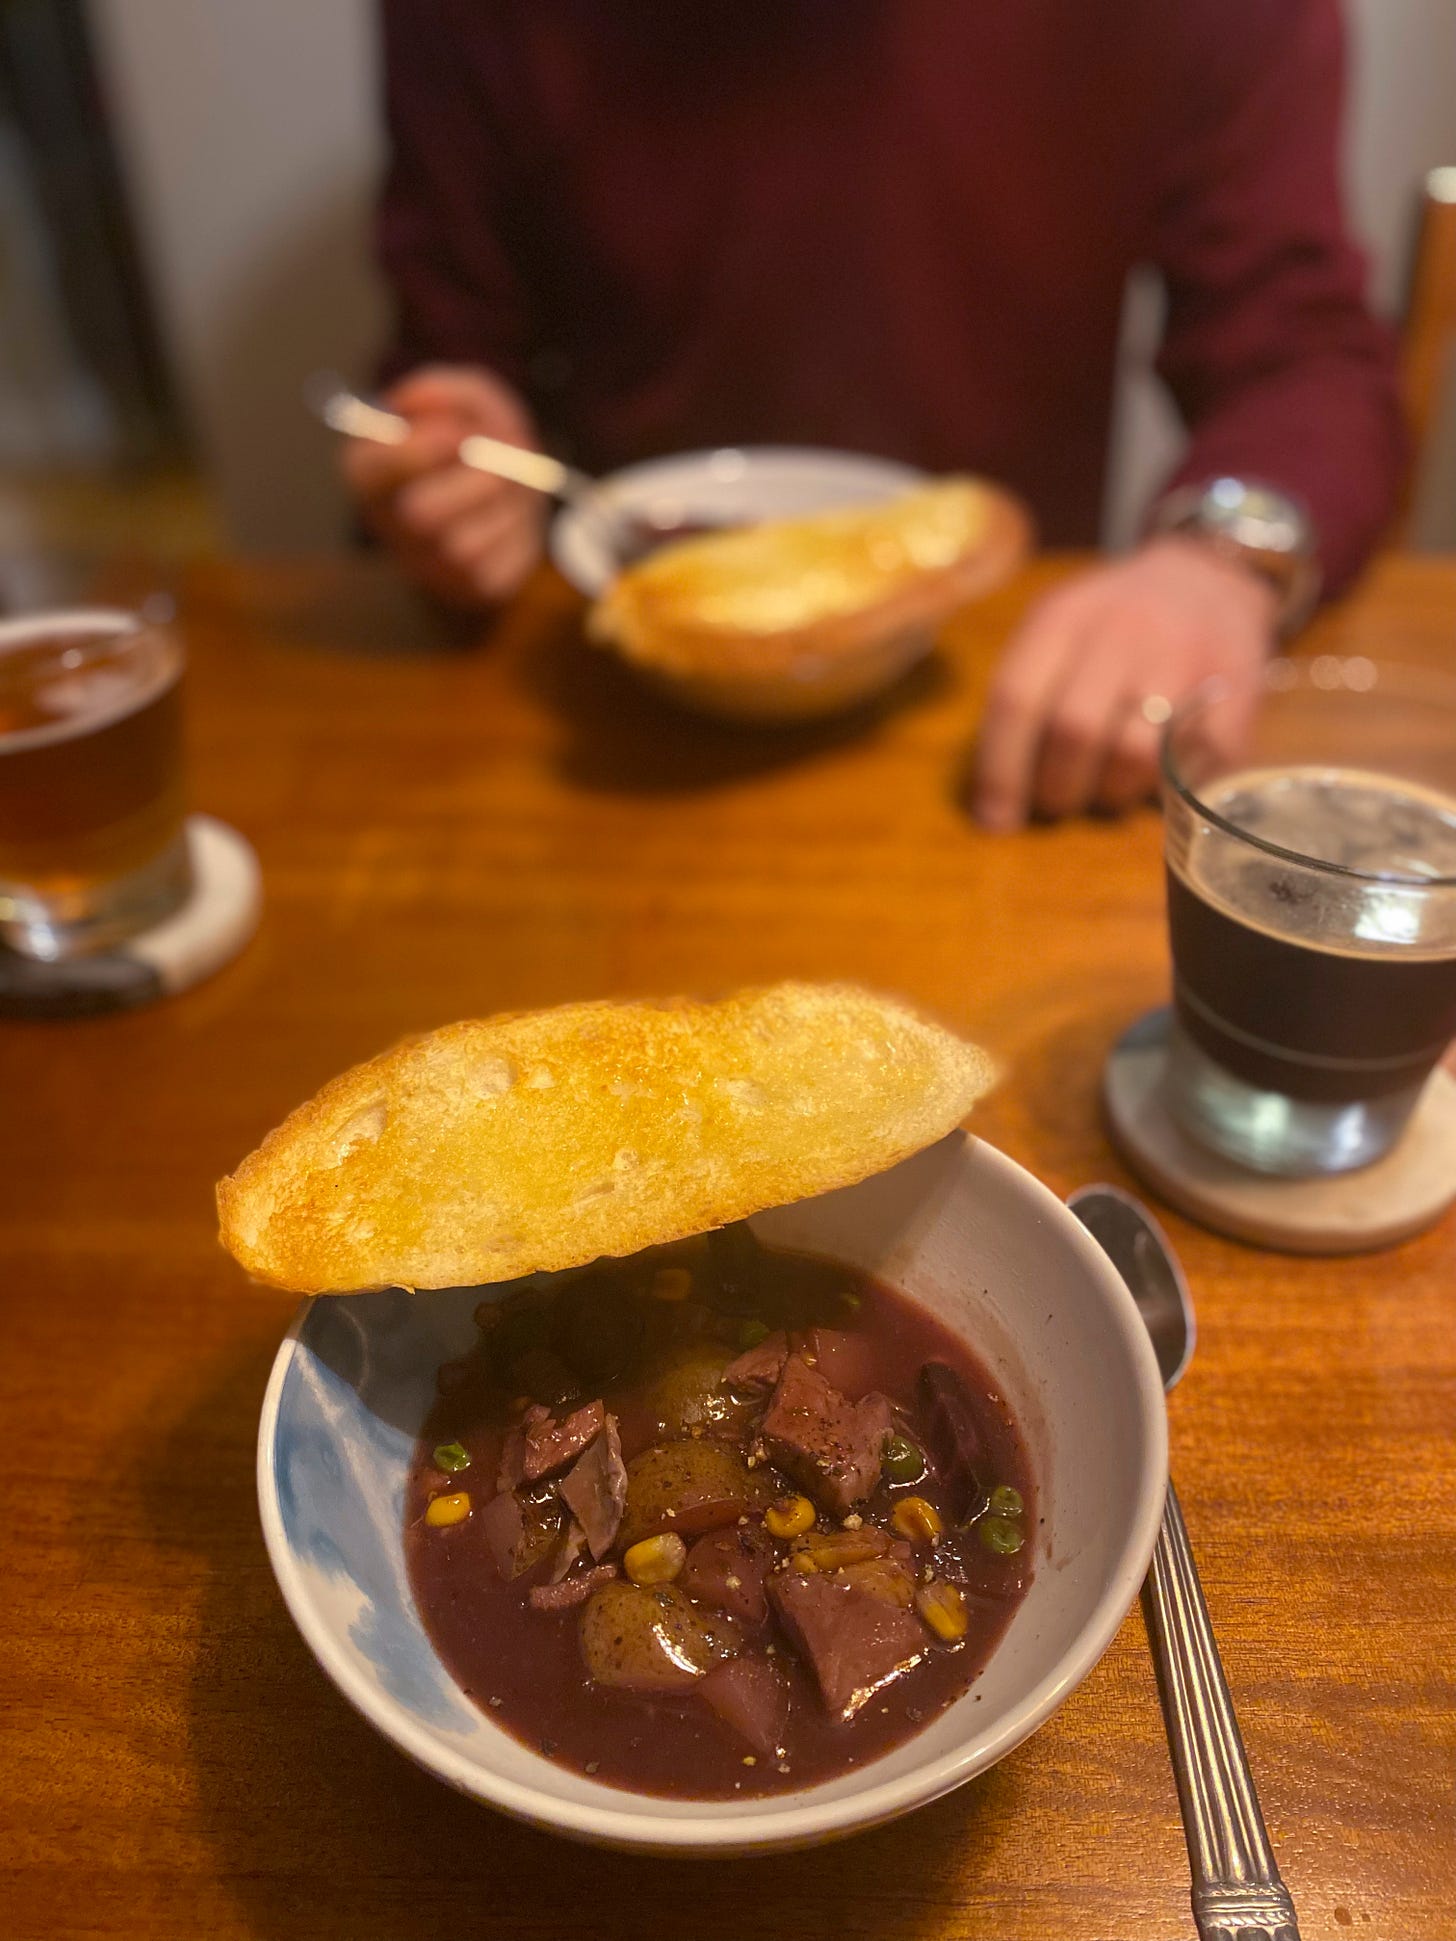 A white and blue bowl of stew with a thick, dark gravy, pieces of turkey and potato among corn and peas and onions. On the edge of the bowl is a slice of buttered toast. Across the table, Jeff holds his spoon over his bowl. Glasses of beer rest on coasters between the bowls.